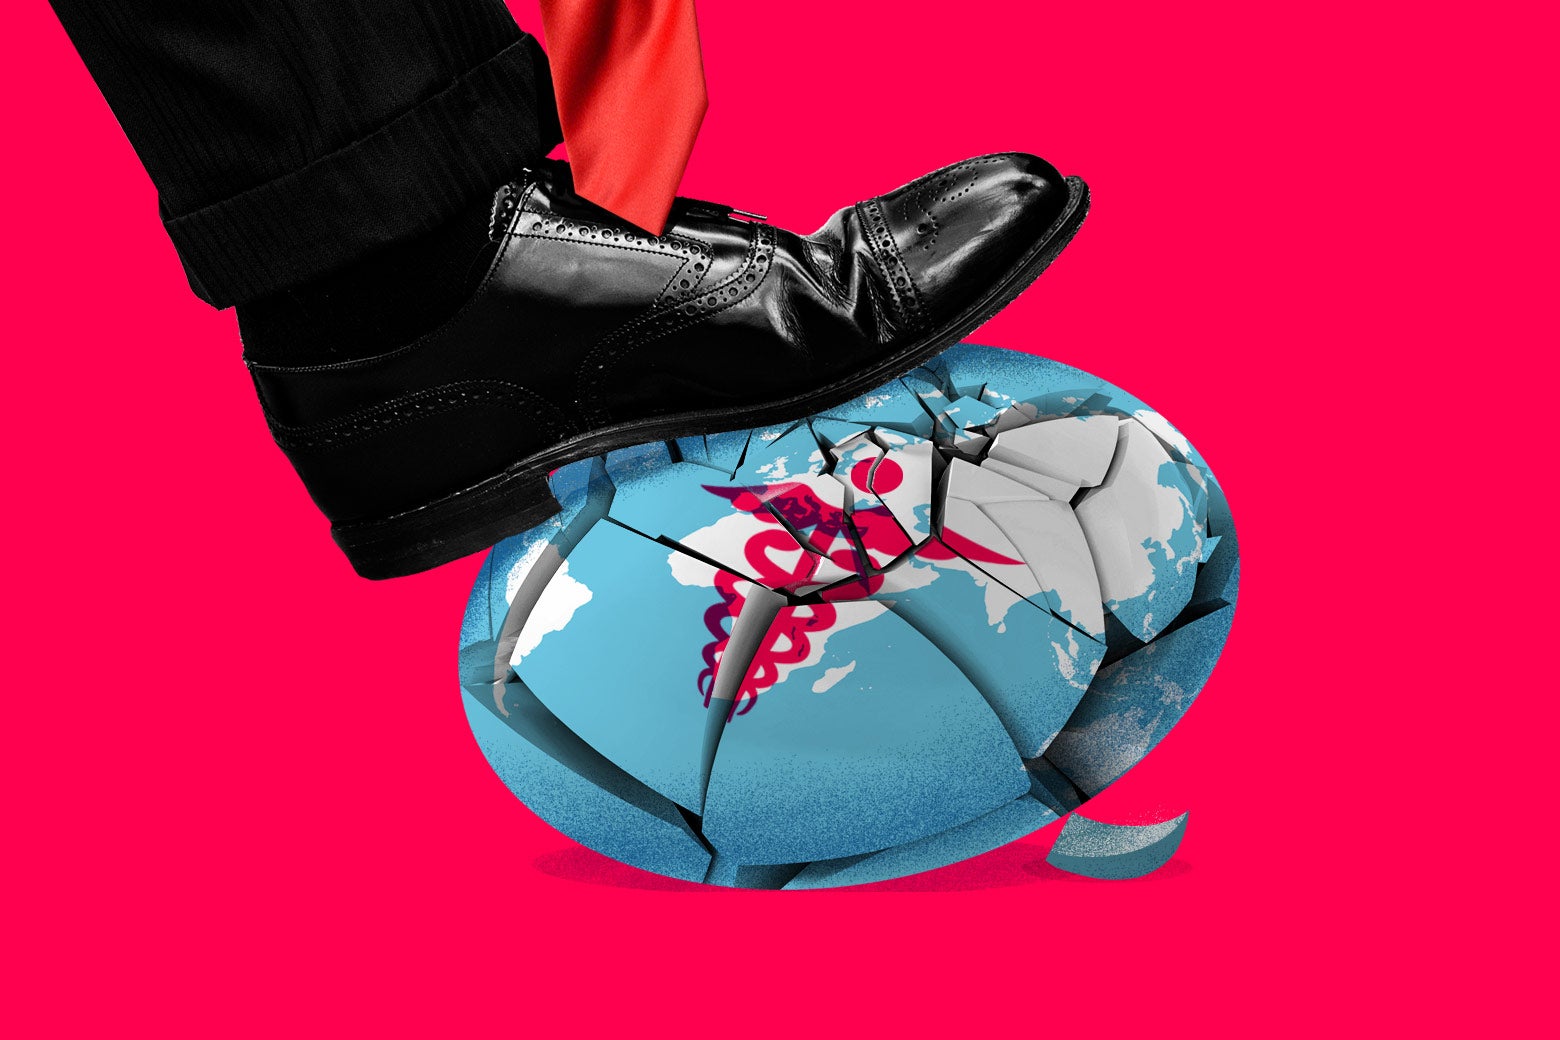 Illustration: A foot crushes a globe representing global health.